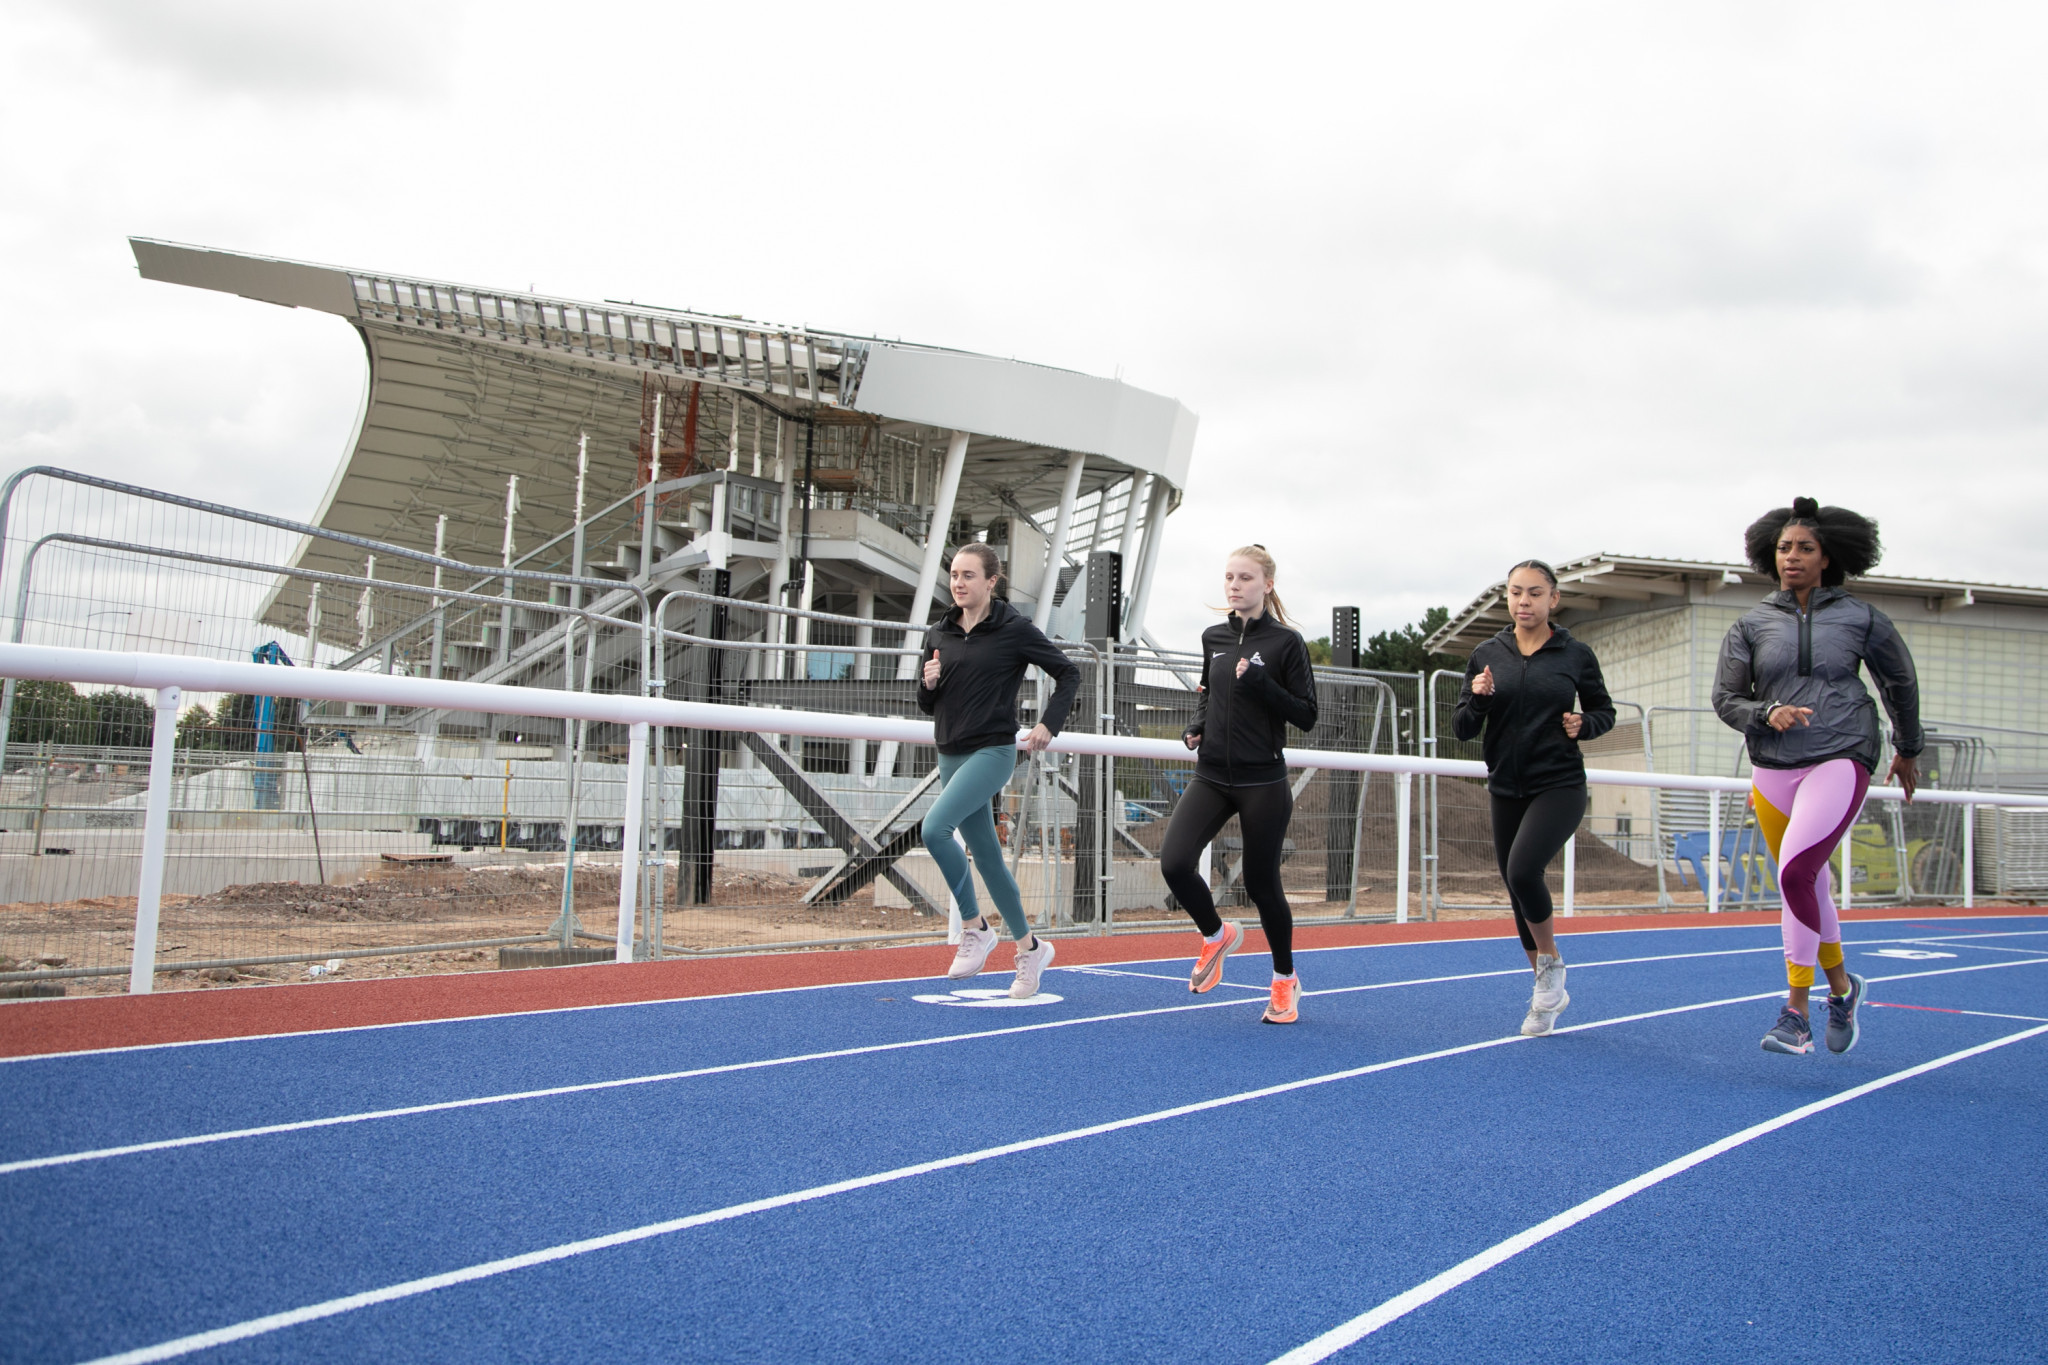 Kadeena Cox visited the Alexander Stadium to check out a new adjoining running track and progress made on a transformation of the venue for the Commonwealth Games ©Birmingham 2022